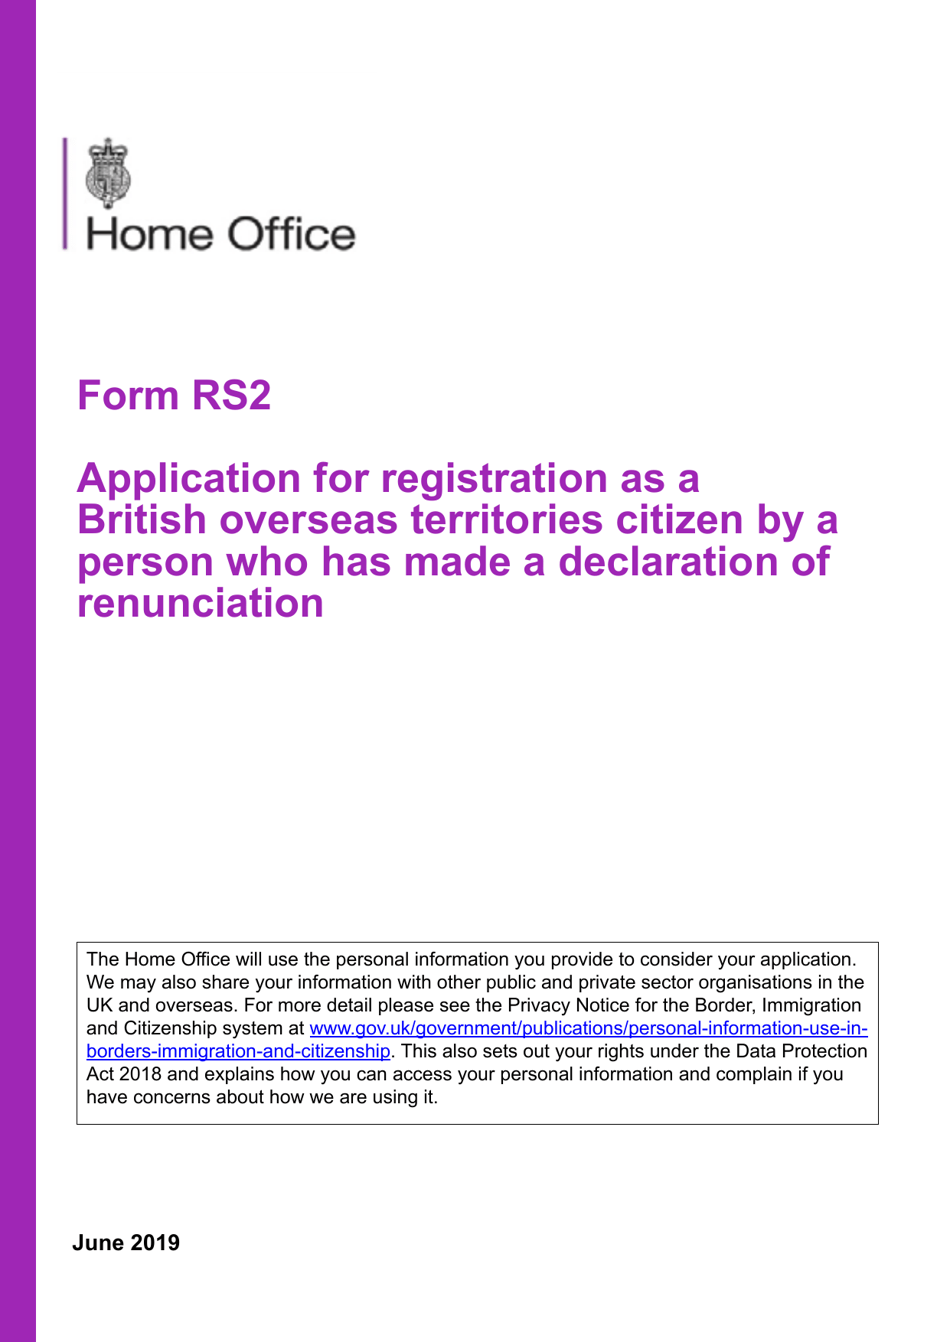 Form RS2 Application for Registration as a British Overseas Territories Citizen by a Person Who Has Made a Declaration of Renunciation - United Kingdom, Page 1